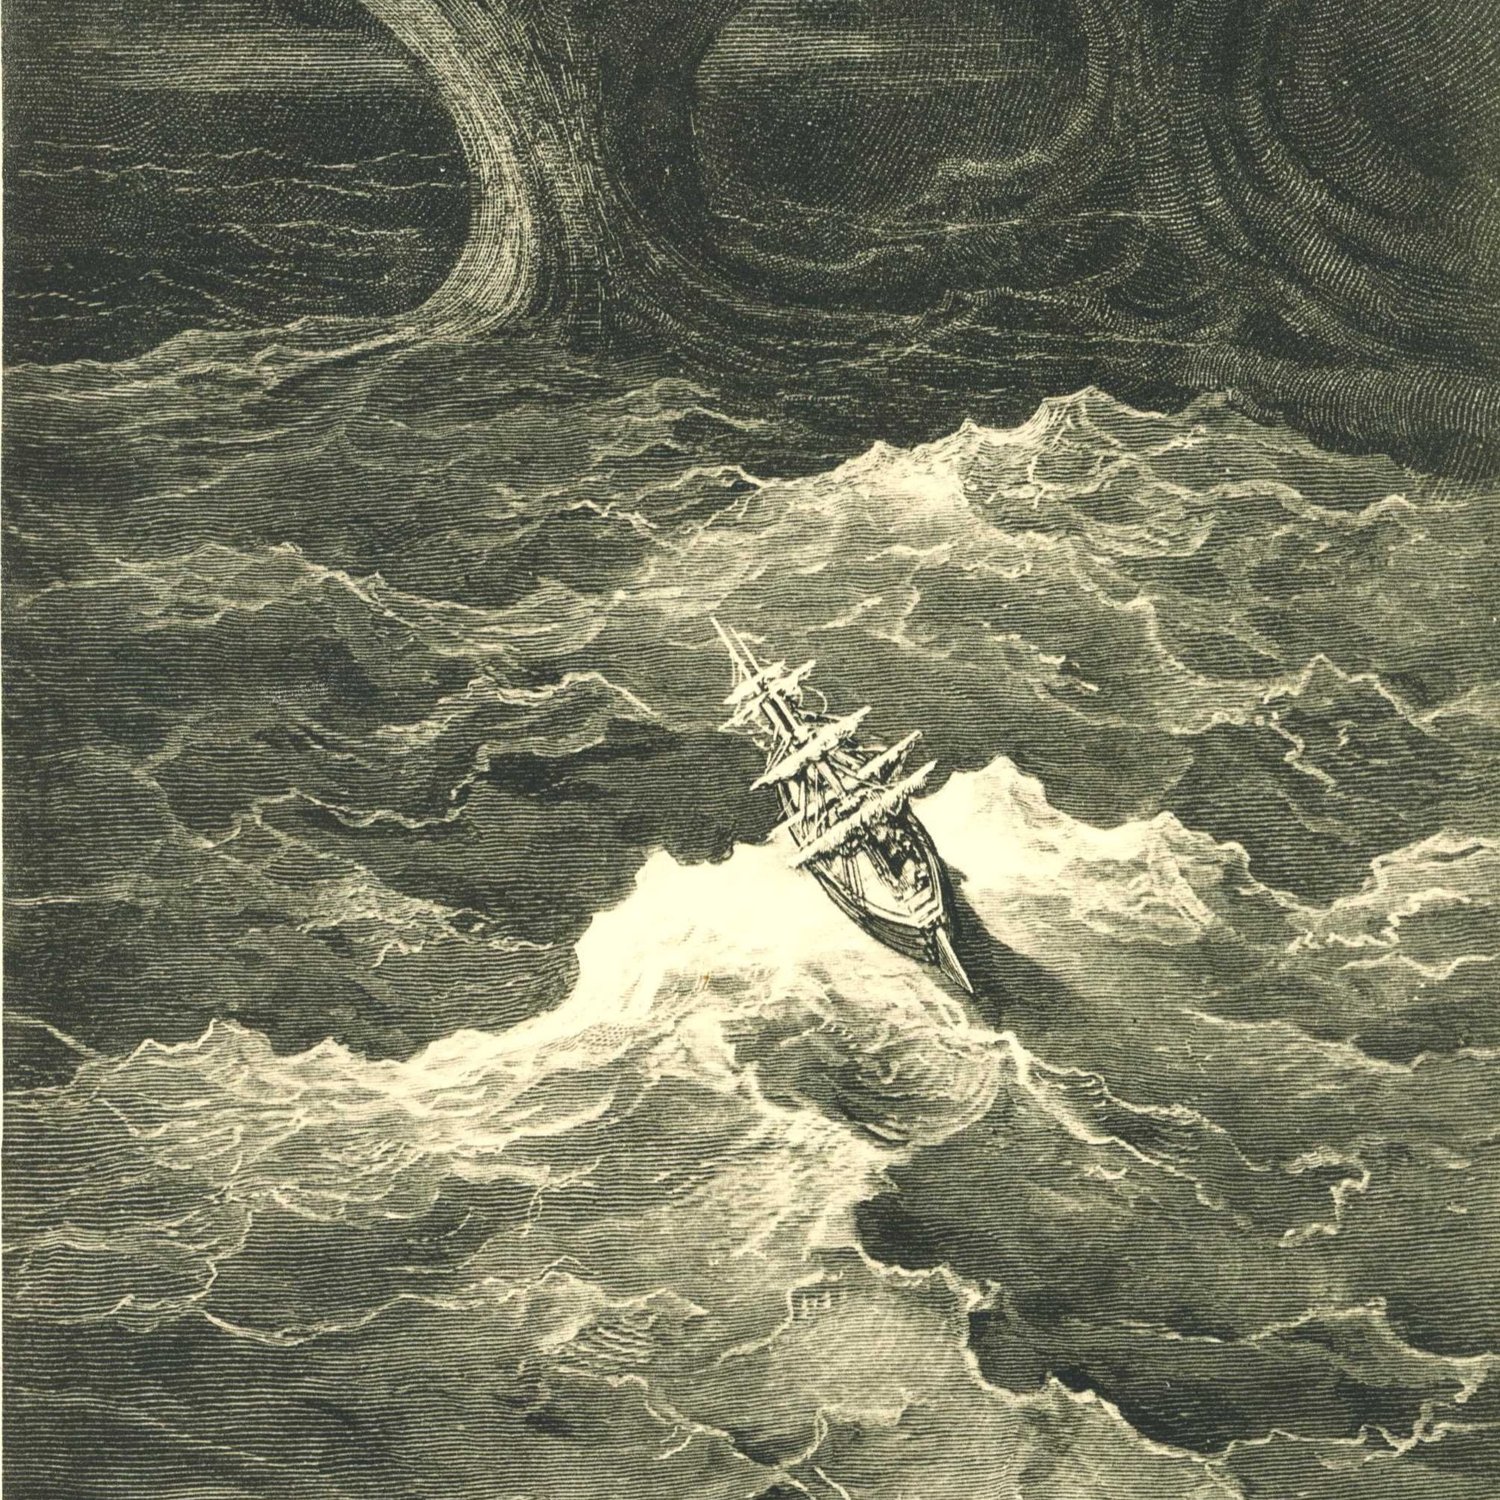 213: Coleridge and the Rime of the Ancient Mariner